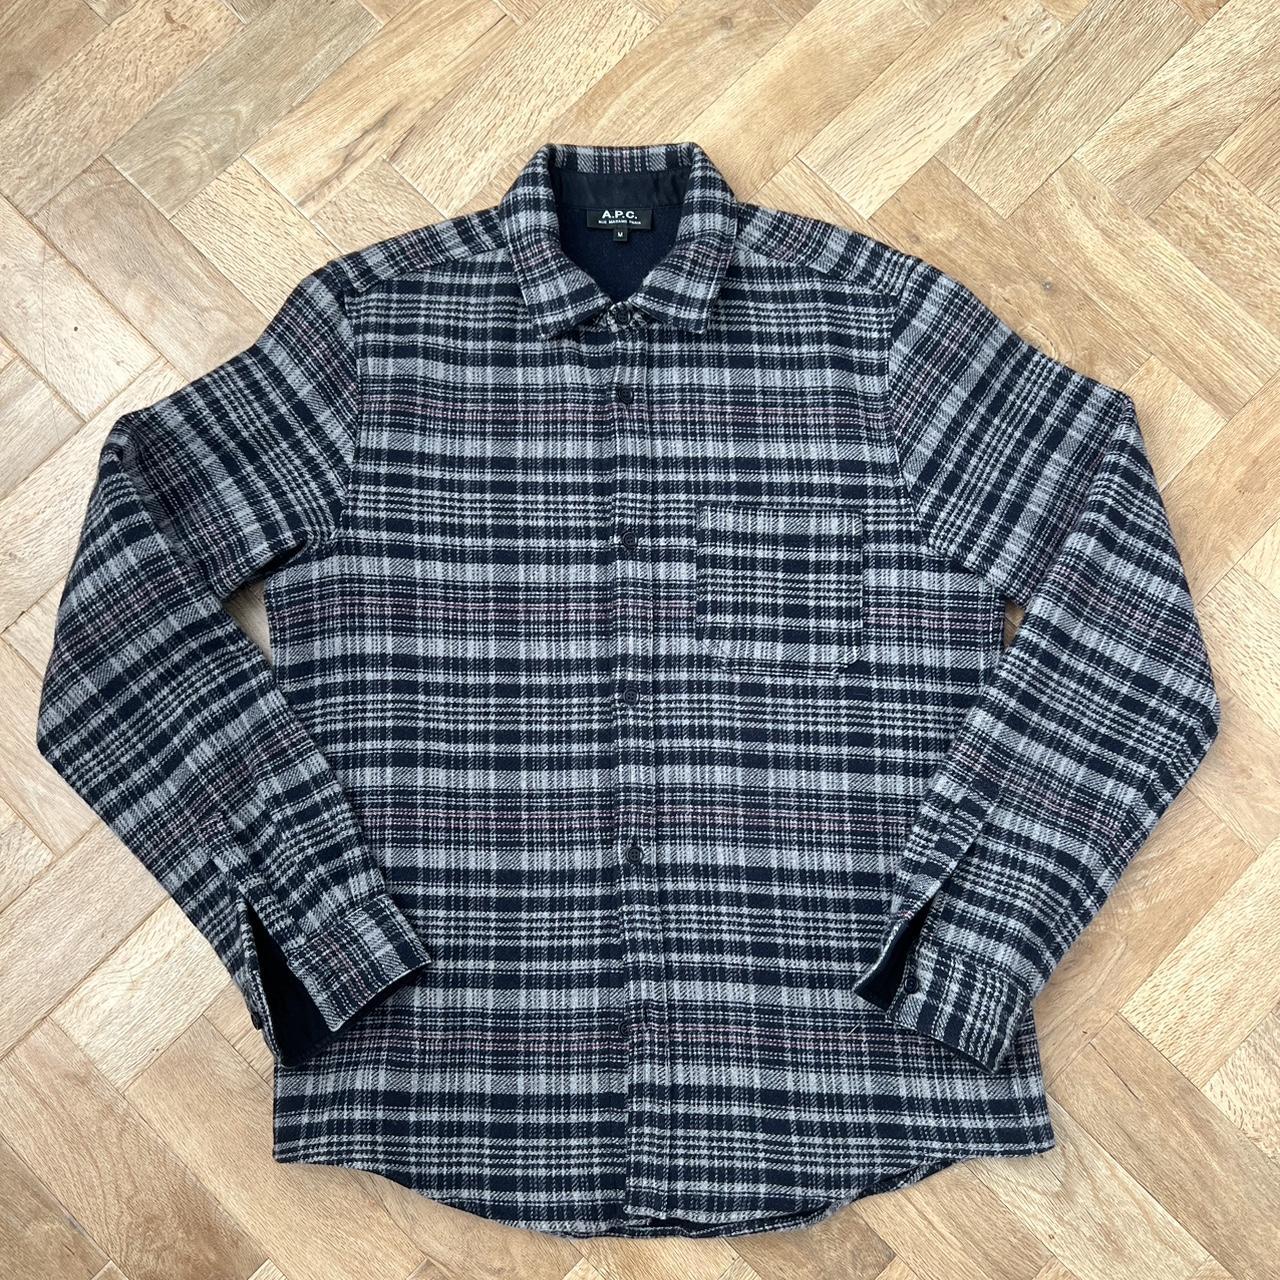 A.P.C. flannel shirt in size medium. Made in a... - Depop